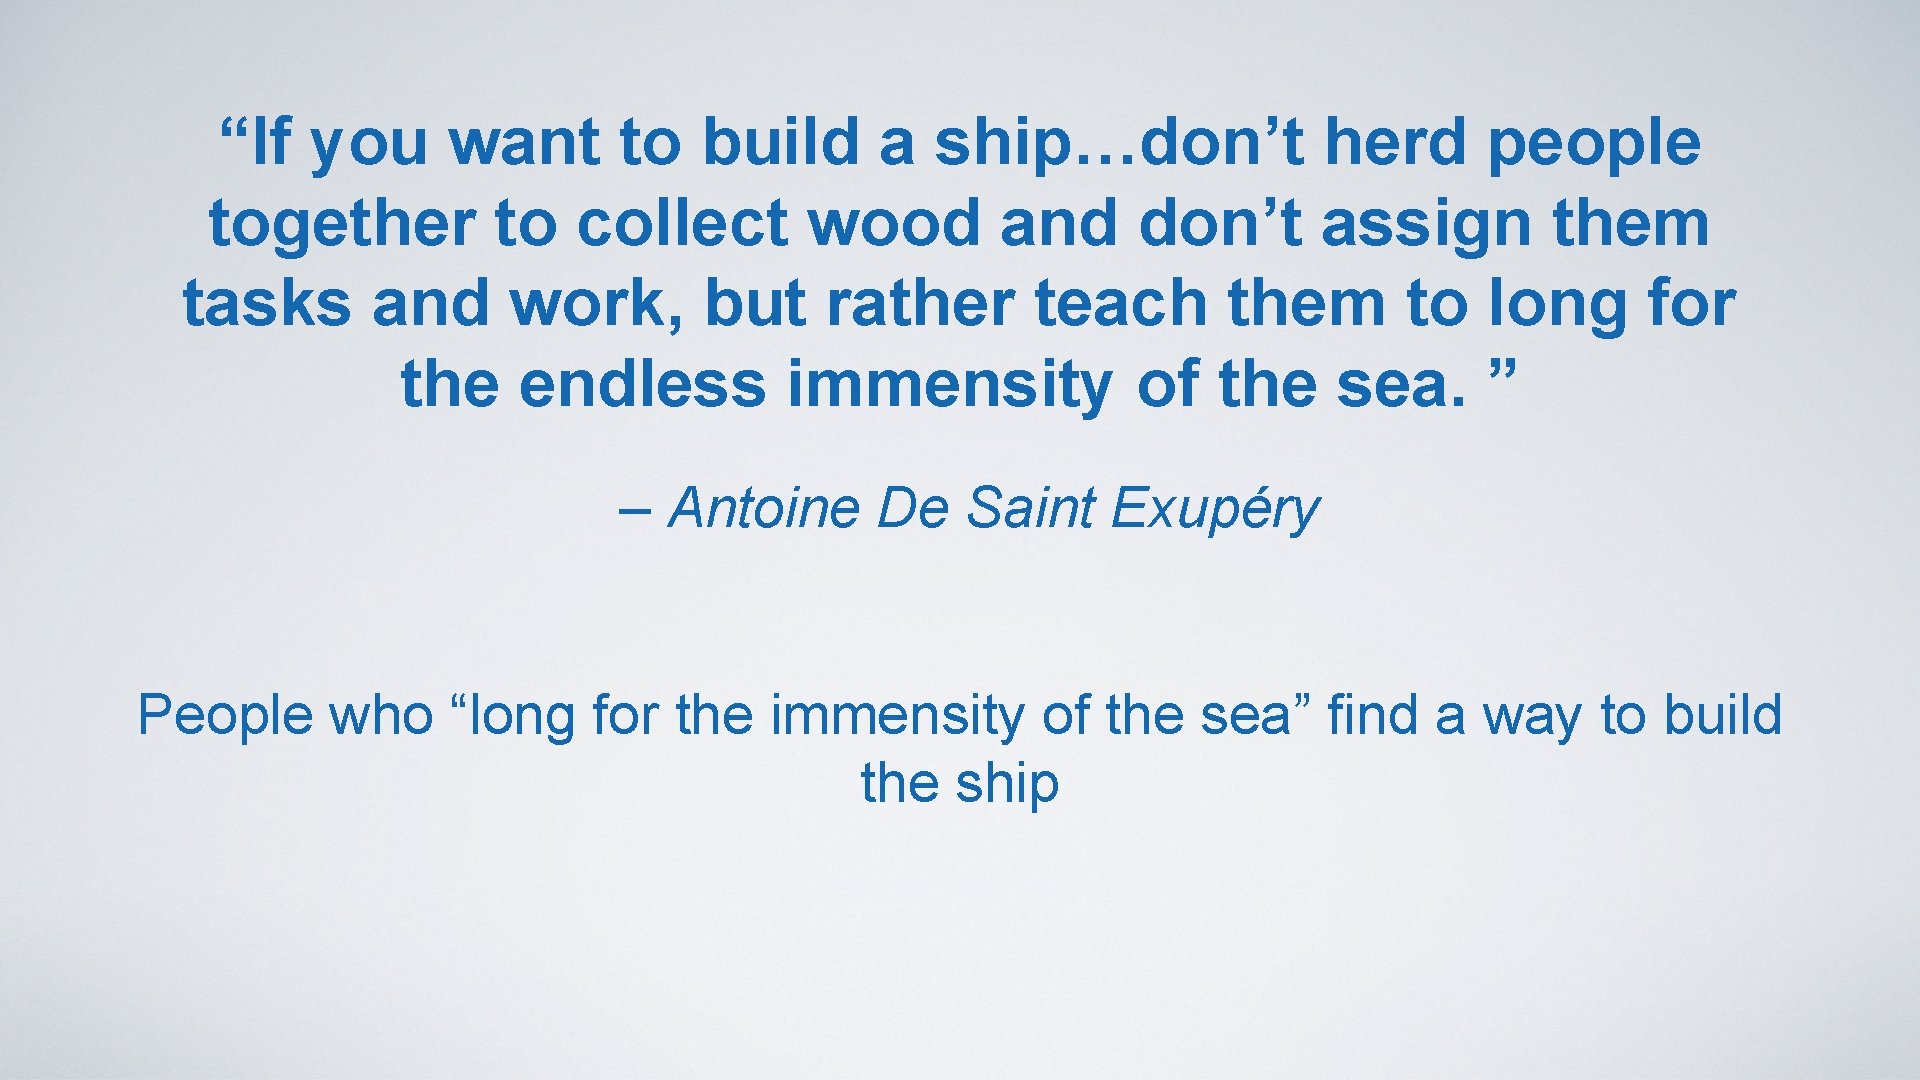 “If you want to build a ship…don’t herd people together to collect wood and